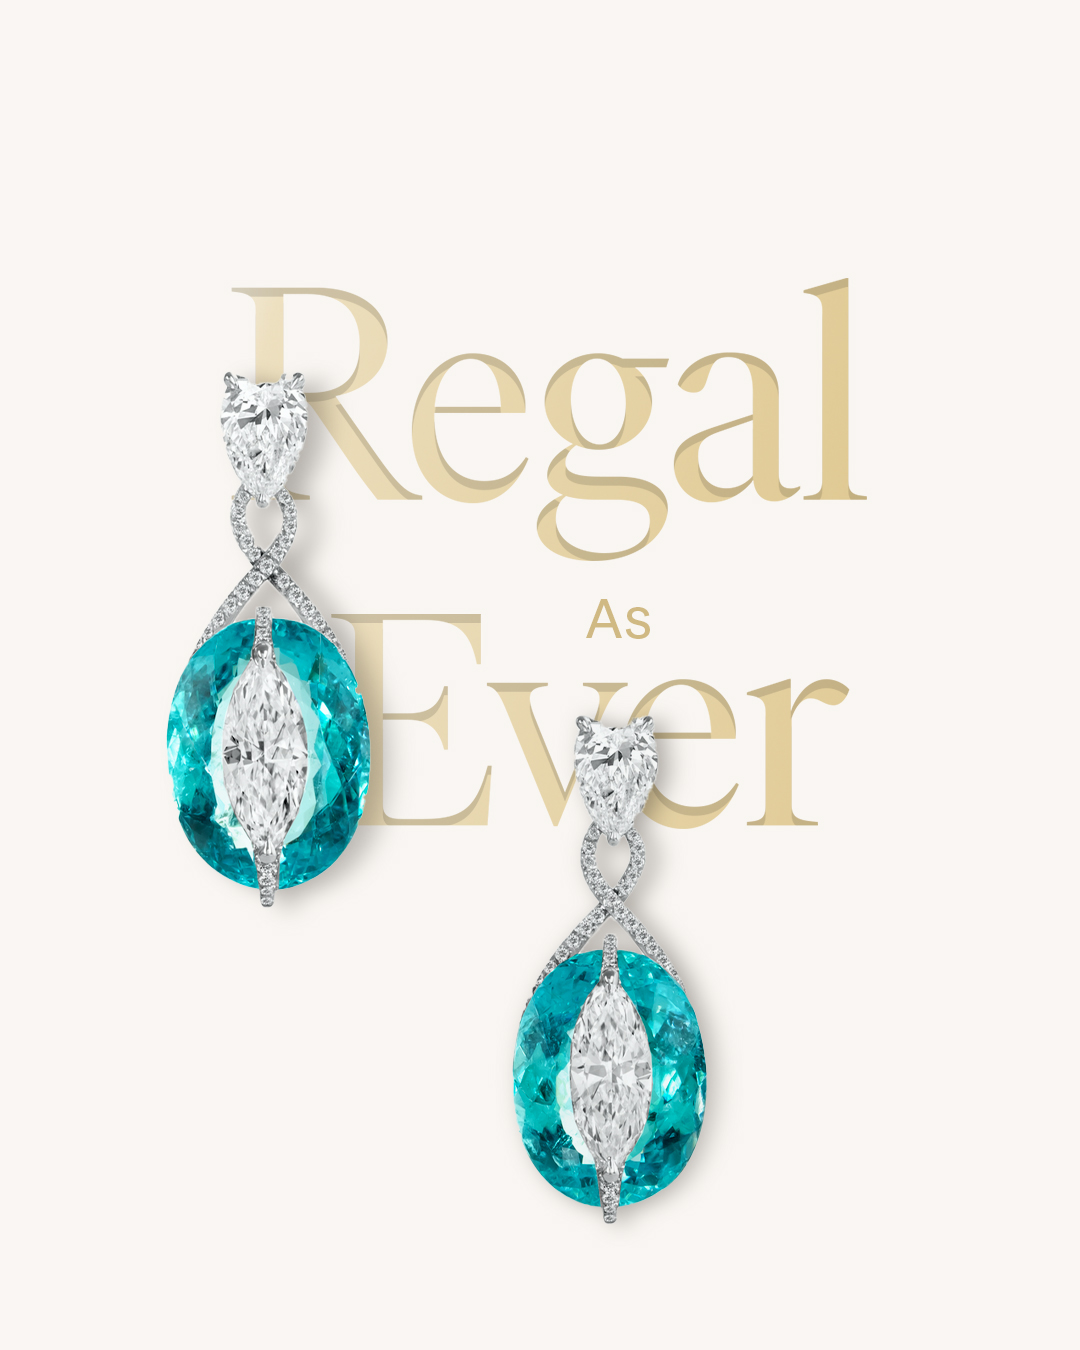 Extra-large diamond earring with intricate design